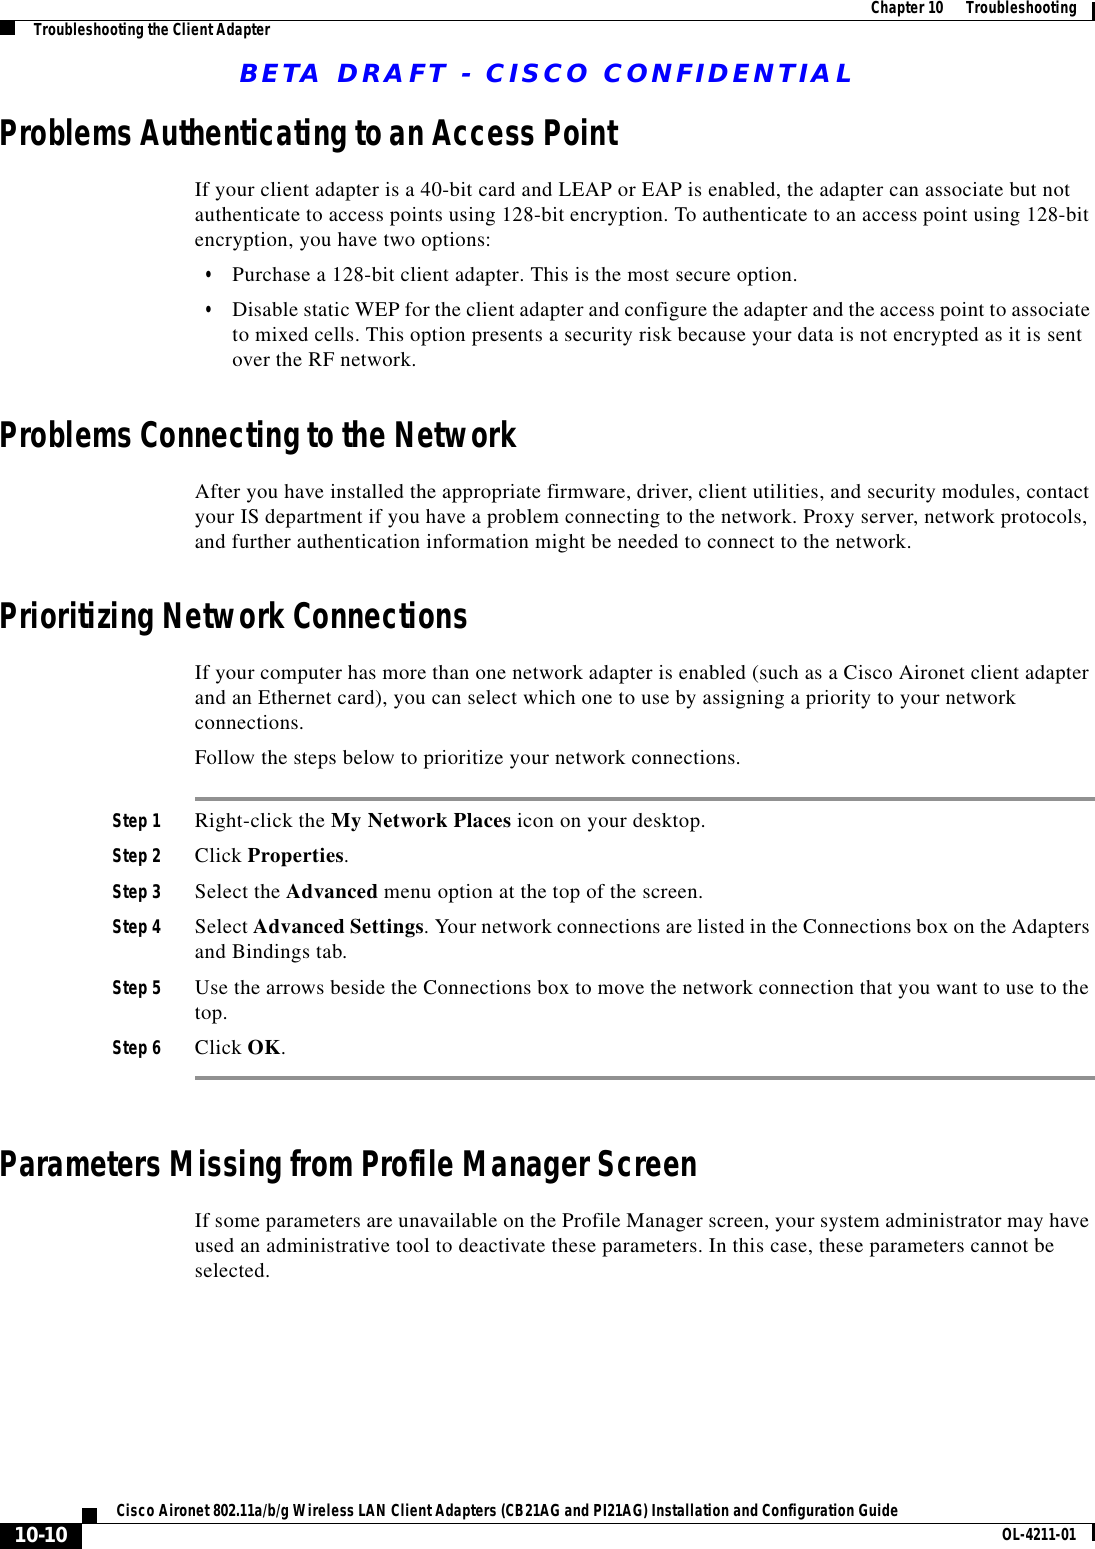 BETA DRAFT - CISCO CONFIDENTIAL10-10Cisco Aironet 802.11a/b/g Wireless LAN Client Adapters (CB21AG and PI21AG) Installation and Configuration Guide OL-4211-01Chapter10      TroubleshootingTroubleshooting the Client AdapterProblems Authenticating to an Access PointIf your client adapter is a 40-bit card and LEAP or EAP is enabled, the adapter can associate but not authenticate to access points using 128-bit encryption. To authenticate to an access point using 128-bit encryption, you have two options:•Purchase a 128-bit client adapter. This is the most secure option.•Disable static WEP for the client adapter and configure the adapter and the access point to associate to mixed cells. This option presents a security risk because your data is not encrypted as it is sent over the RF network.Problems Connecting to the NetworkAfter you have installed the appropriate firmware, driver, client utilities, and security modules, contact your IS department if you have a problem connecting to the network. Proxy server, network protocols, and further authentication information might be needed to connect to the network.Prioritizing Network ConnectionsIf your computer has more than one network adapter is enabled (such as a Cisco Aironet client adapter and an Ethernet card), you can select which one to use by assigning a priority to your network connections.Follow the steps below to prioritize your network connections.Step 1 Right-click the My Network Places icon on your desktop.Step 2 Click Properties.Step 3 Select the Advanced menu option at the top of the screen.Step 4 Select Advanced Settings. Your network connections are listed in the Connections box on the Adapters and Bindings tab.Step 5 Use the arrows beside the Connections box to move the network connection that you want to use to the top.Step 6 Click OK.Parameters Missing from Profile Manager ScreenIf some parameters are unavailable on the Profile Manager screen, your system administrator may have used an administrative tool to deactivate these parameters. In this case, these parameters cannot be selected.